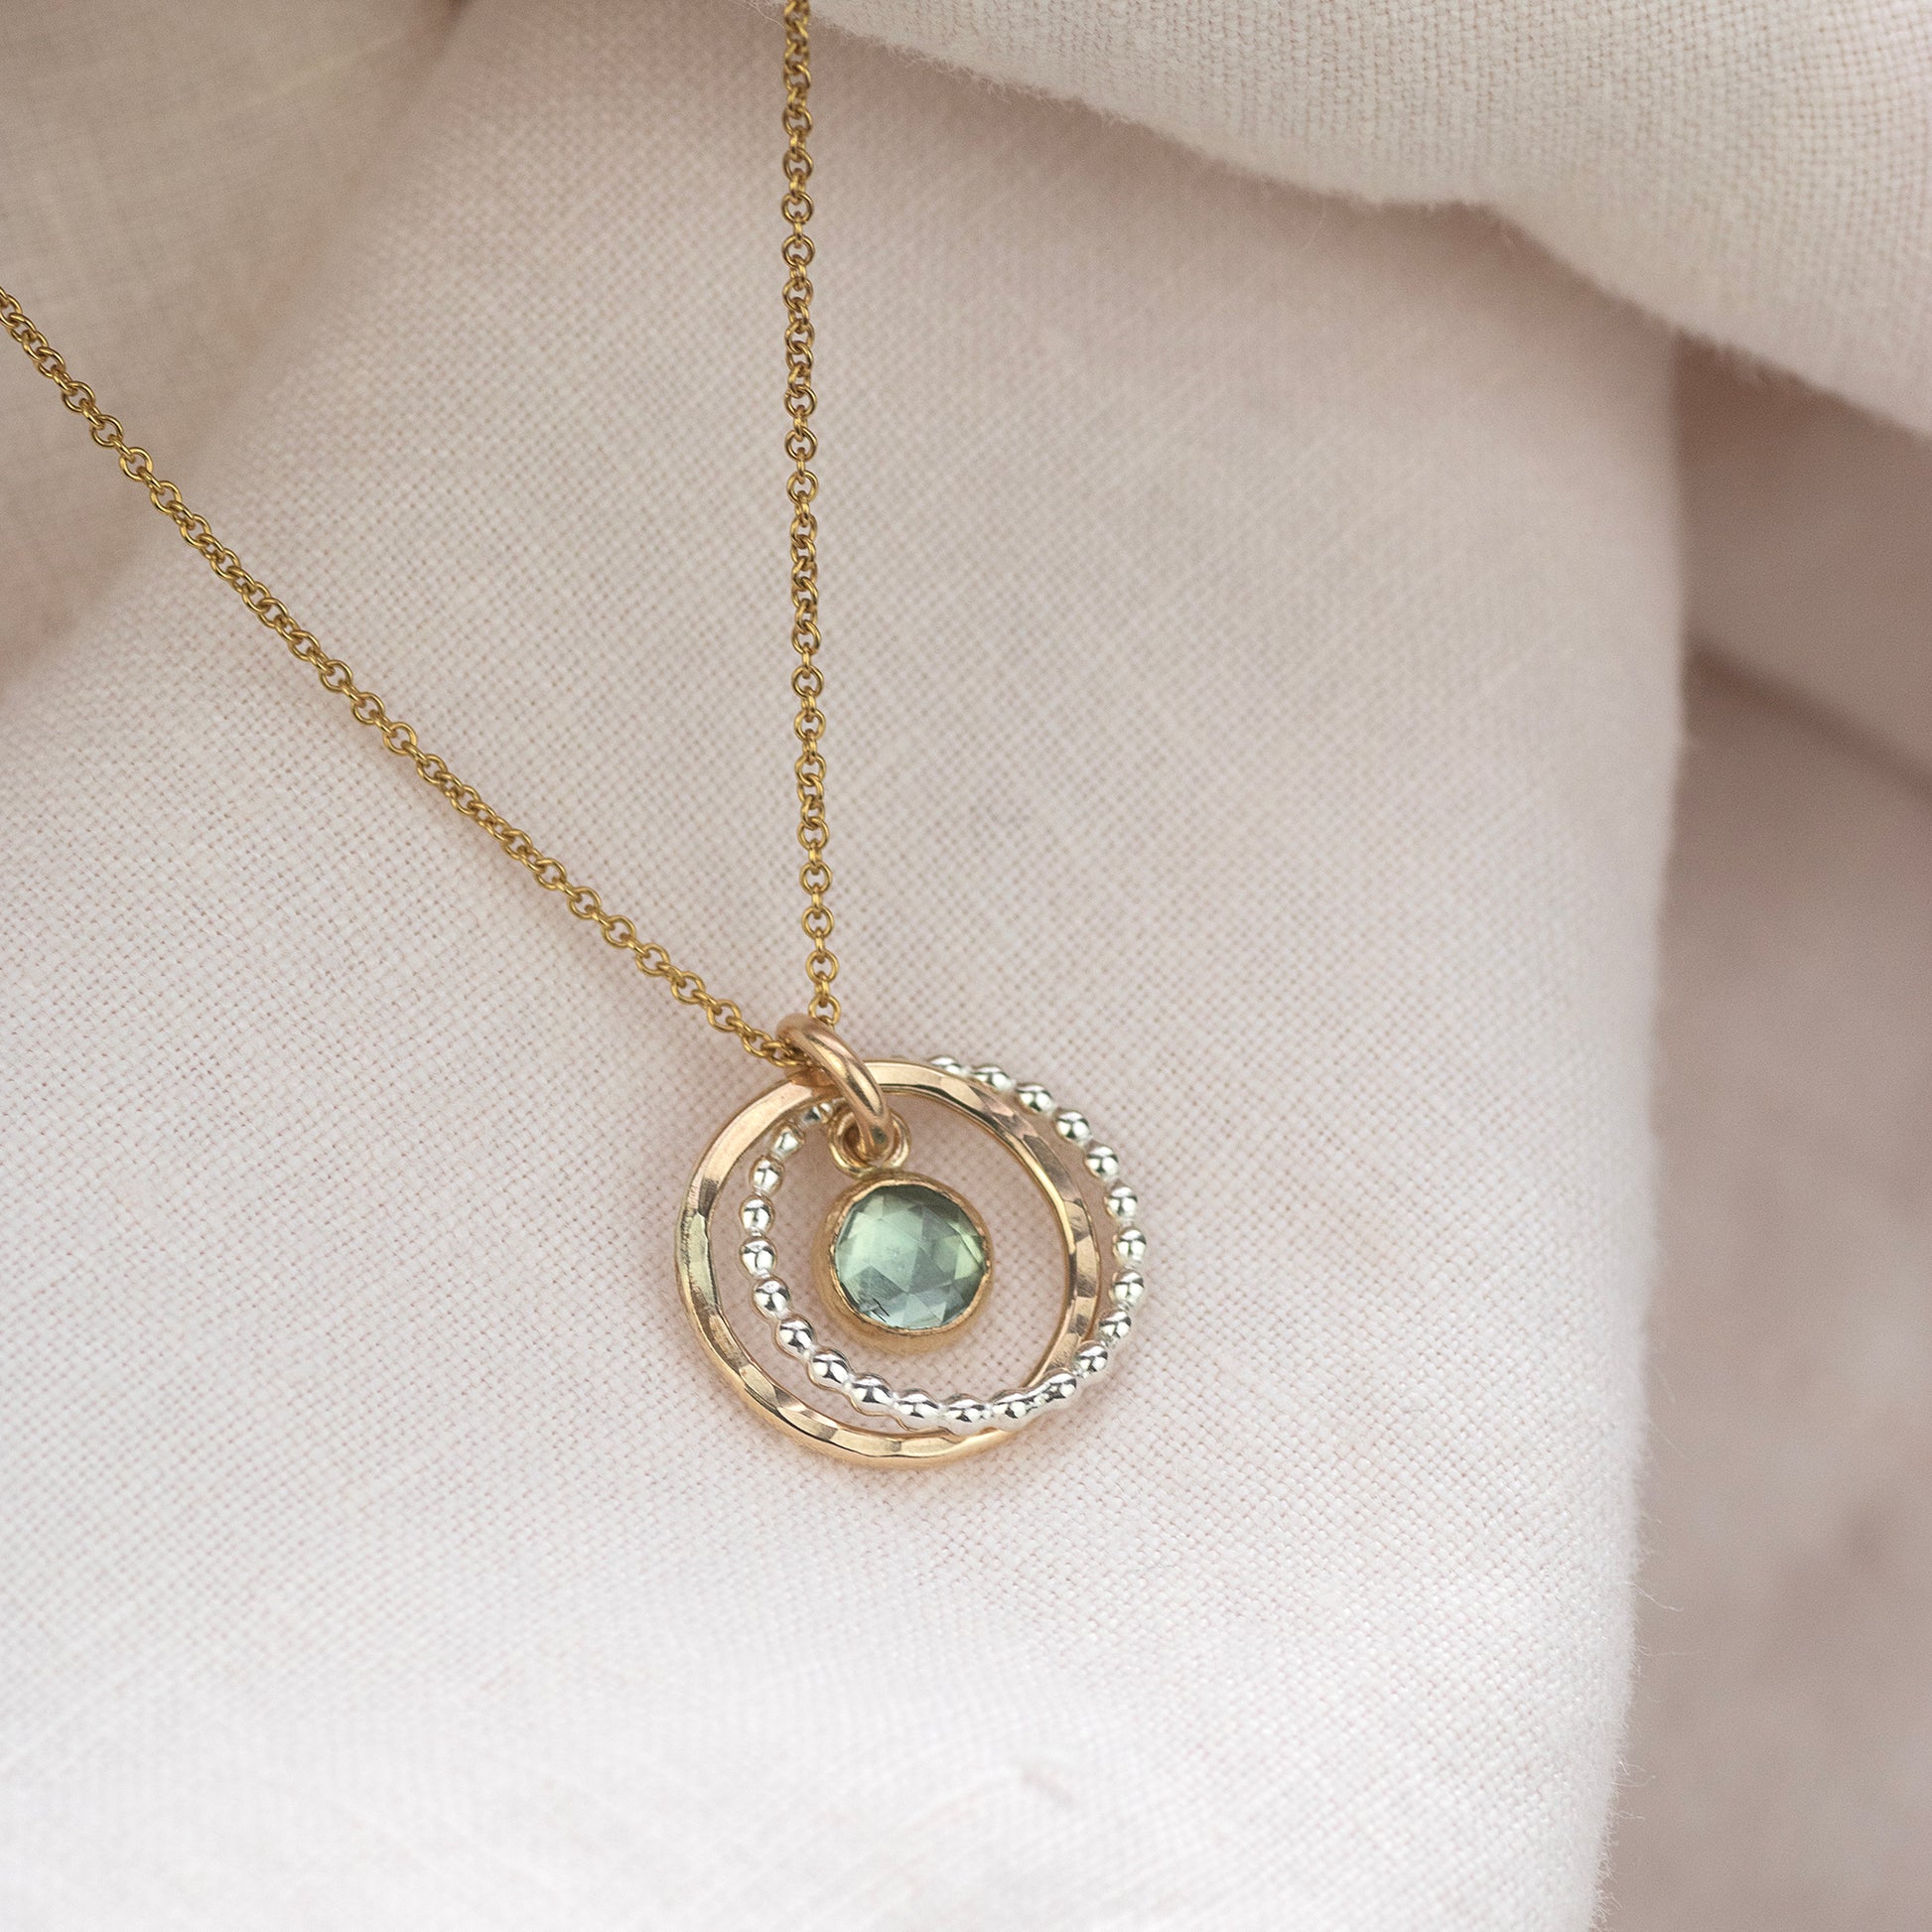 4th Anniversary Gift - Blue Topaz Anniversary Necklace - Silver & Gold